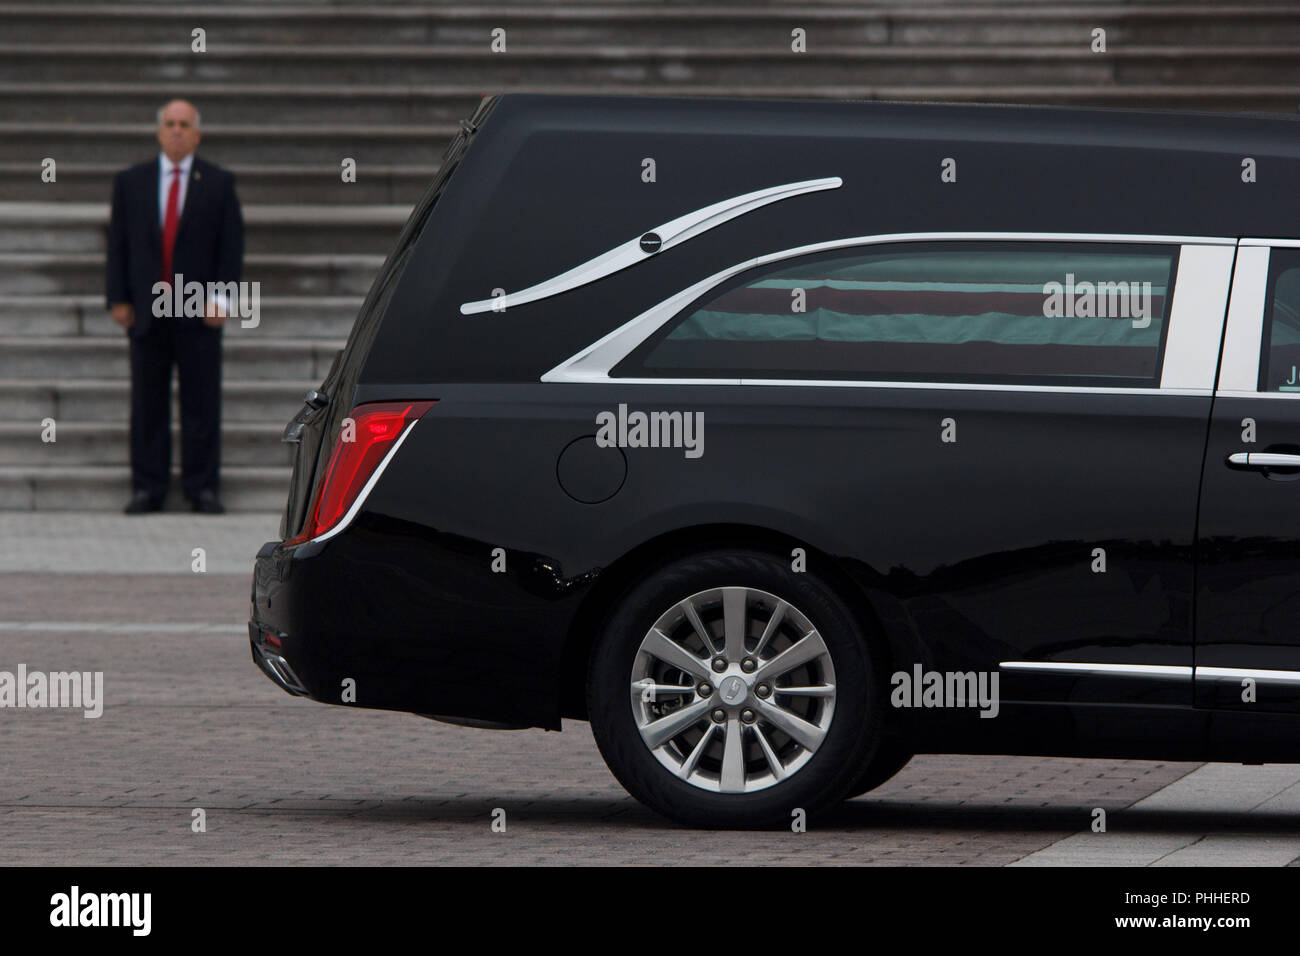 September 1, 2018 - Washington, DC, USA - The casket of Senator John McCain is seen departing the Capitol en route to a memorial service at the National Cathedral. (Credit Image: © Michael Candelori/ZUMA Wire) Stock Photo